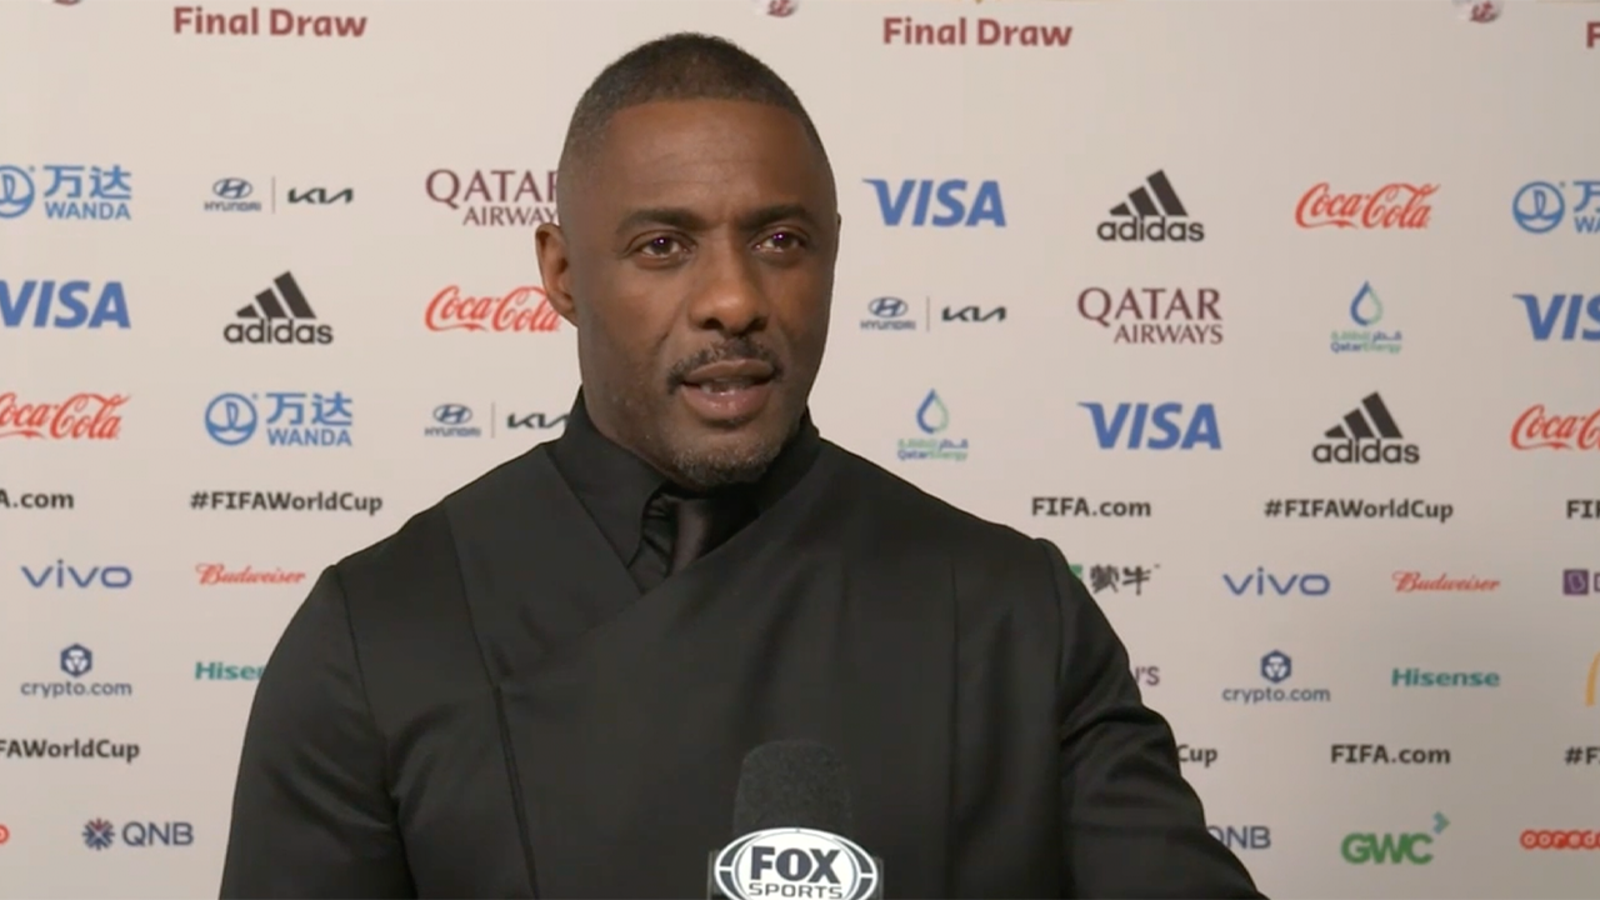 Idris Elba on 2022 FIFA World Cup: 'I can't wait for the England vs. USA game'